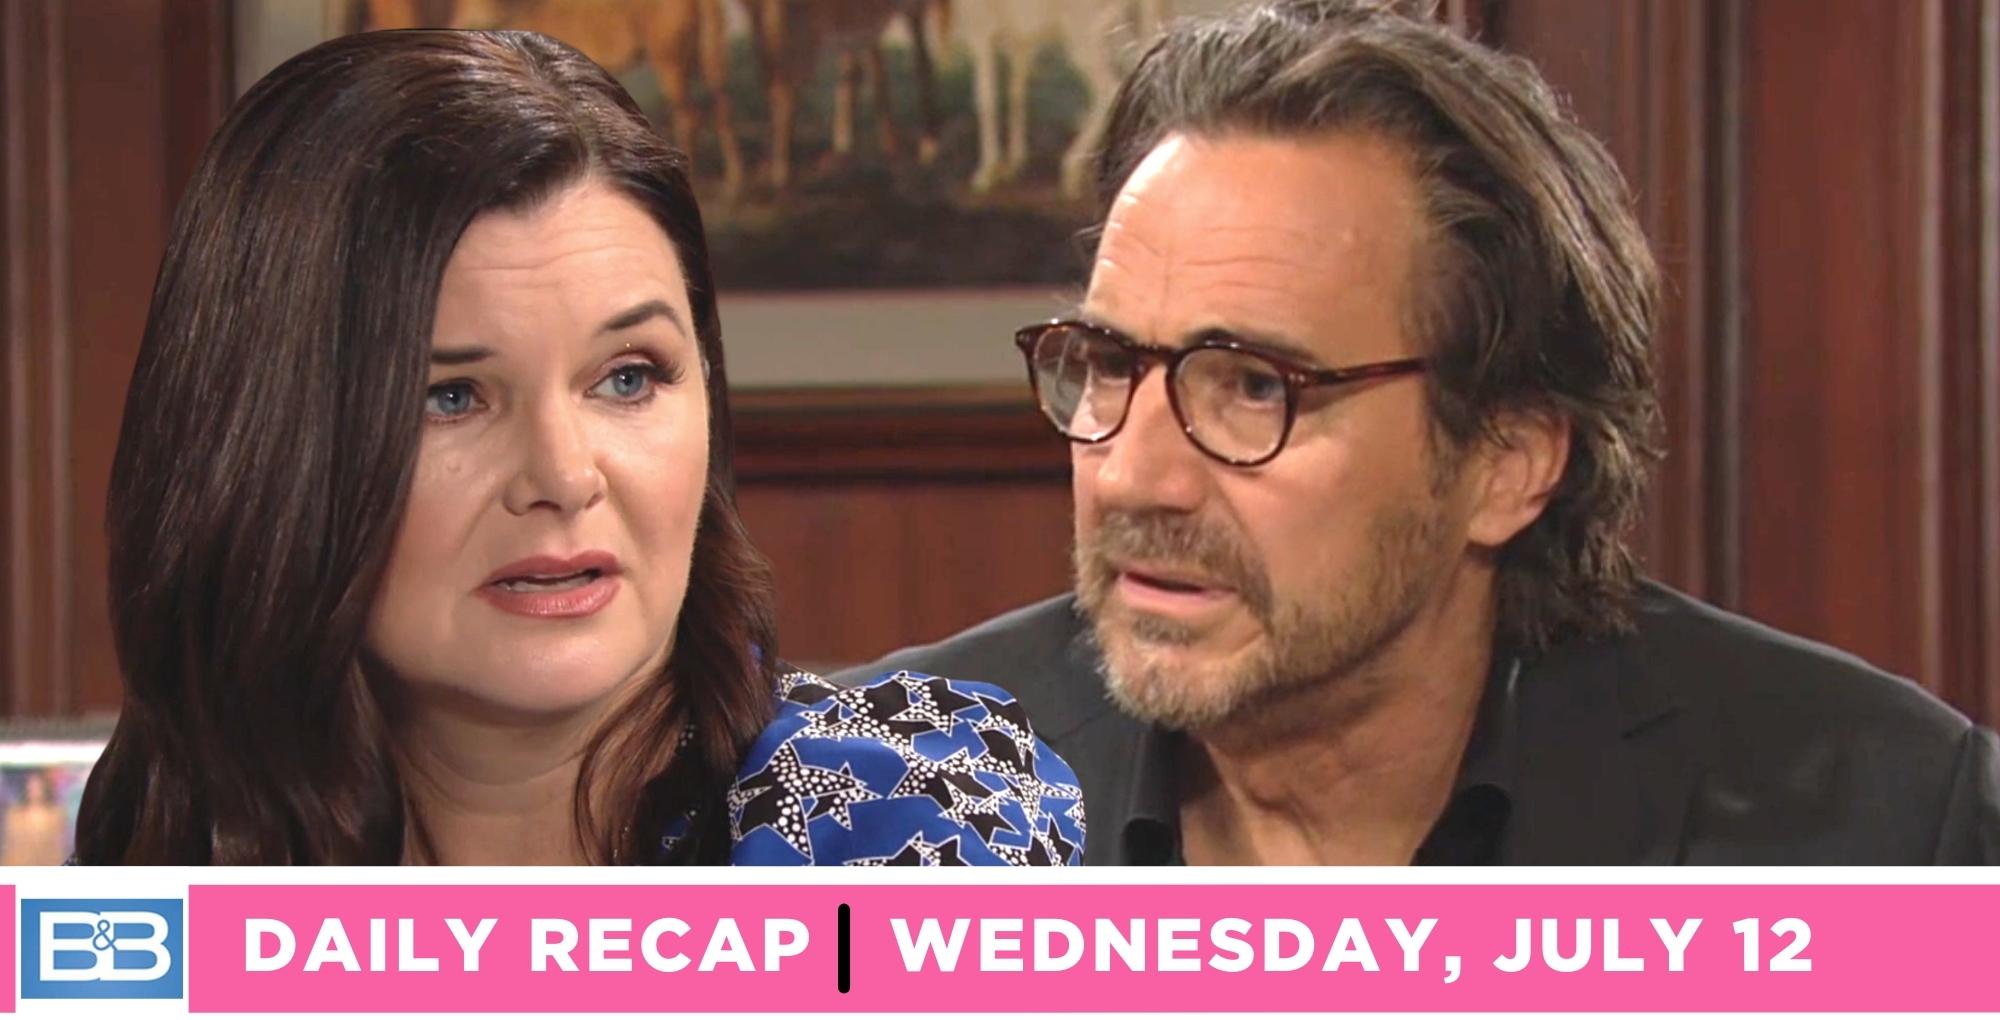 ridge forrester put katie logan on the spot on the bold and the beautiful recap for tuesday, july 12, 2023.